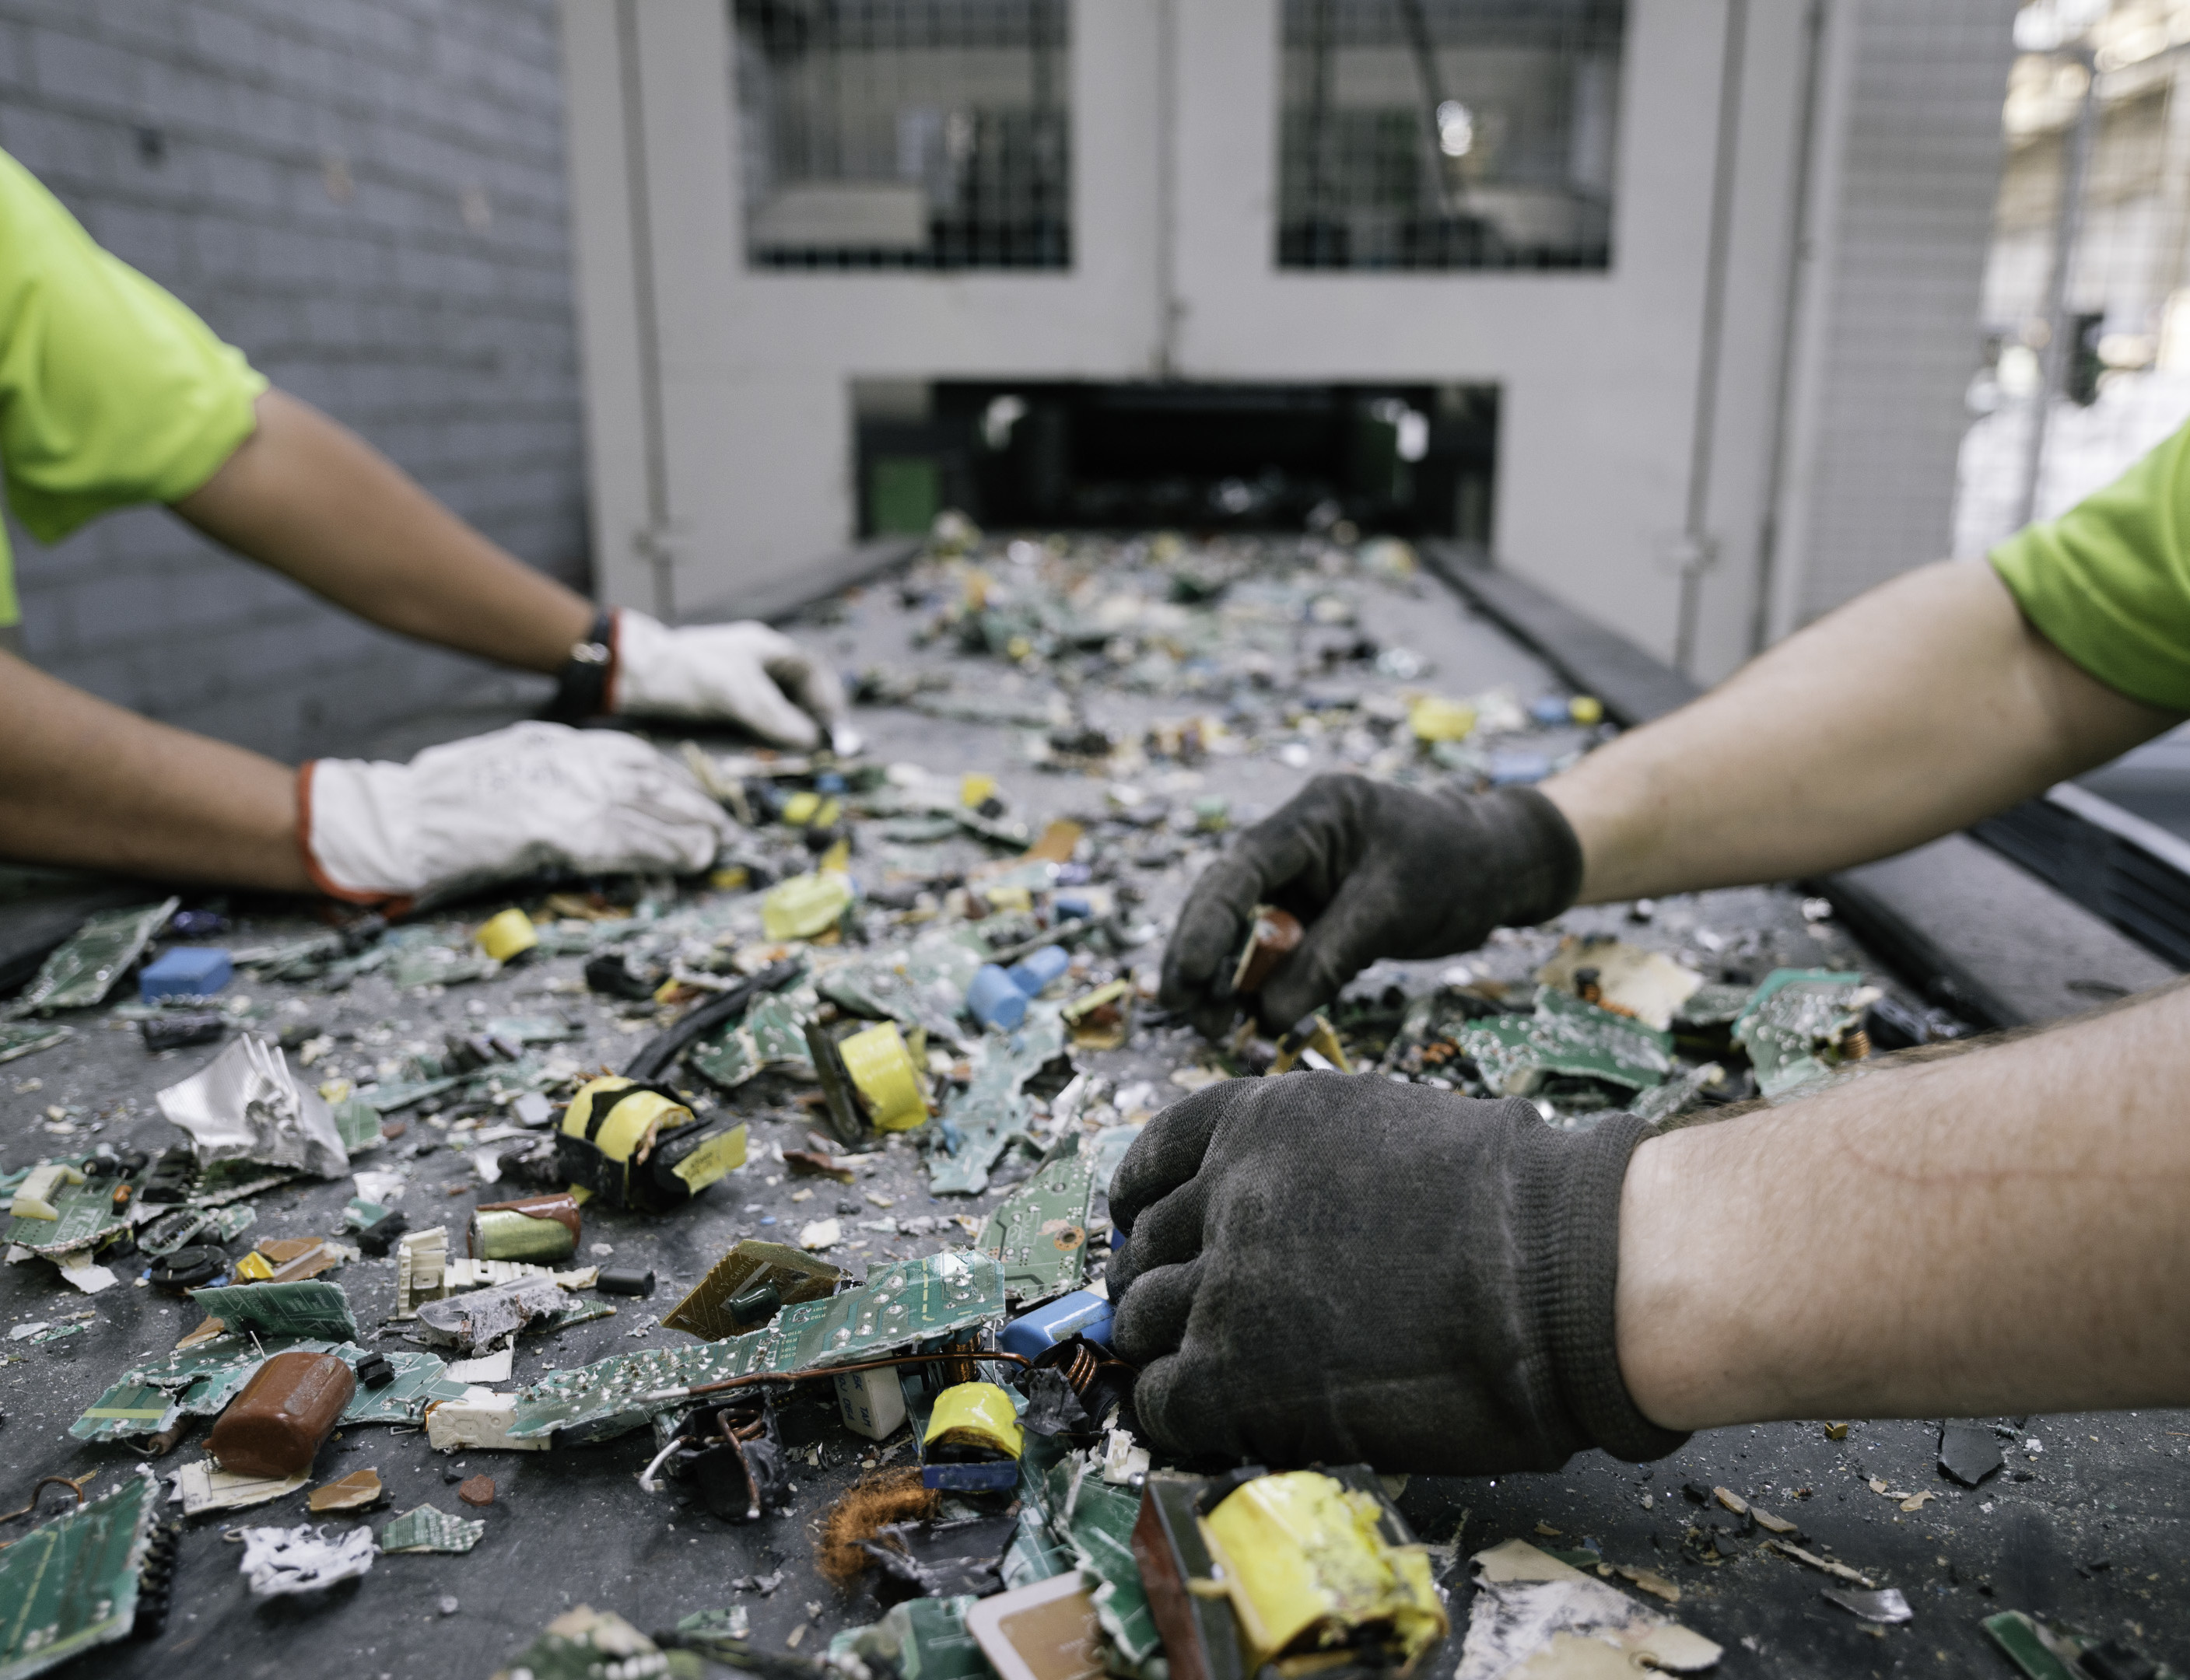 Pretreatment and mechanical dismantlement of electronic cards. Each year, 25,000 tonnes of WEEE are crushed and ground up at the firm’s two sites in Le Havre in order to recover their precious contents - Credits: Olivier Roche